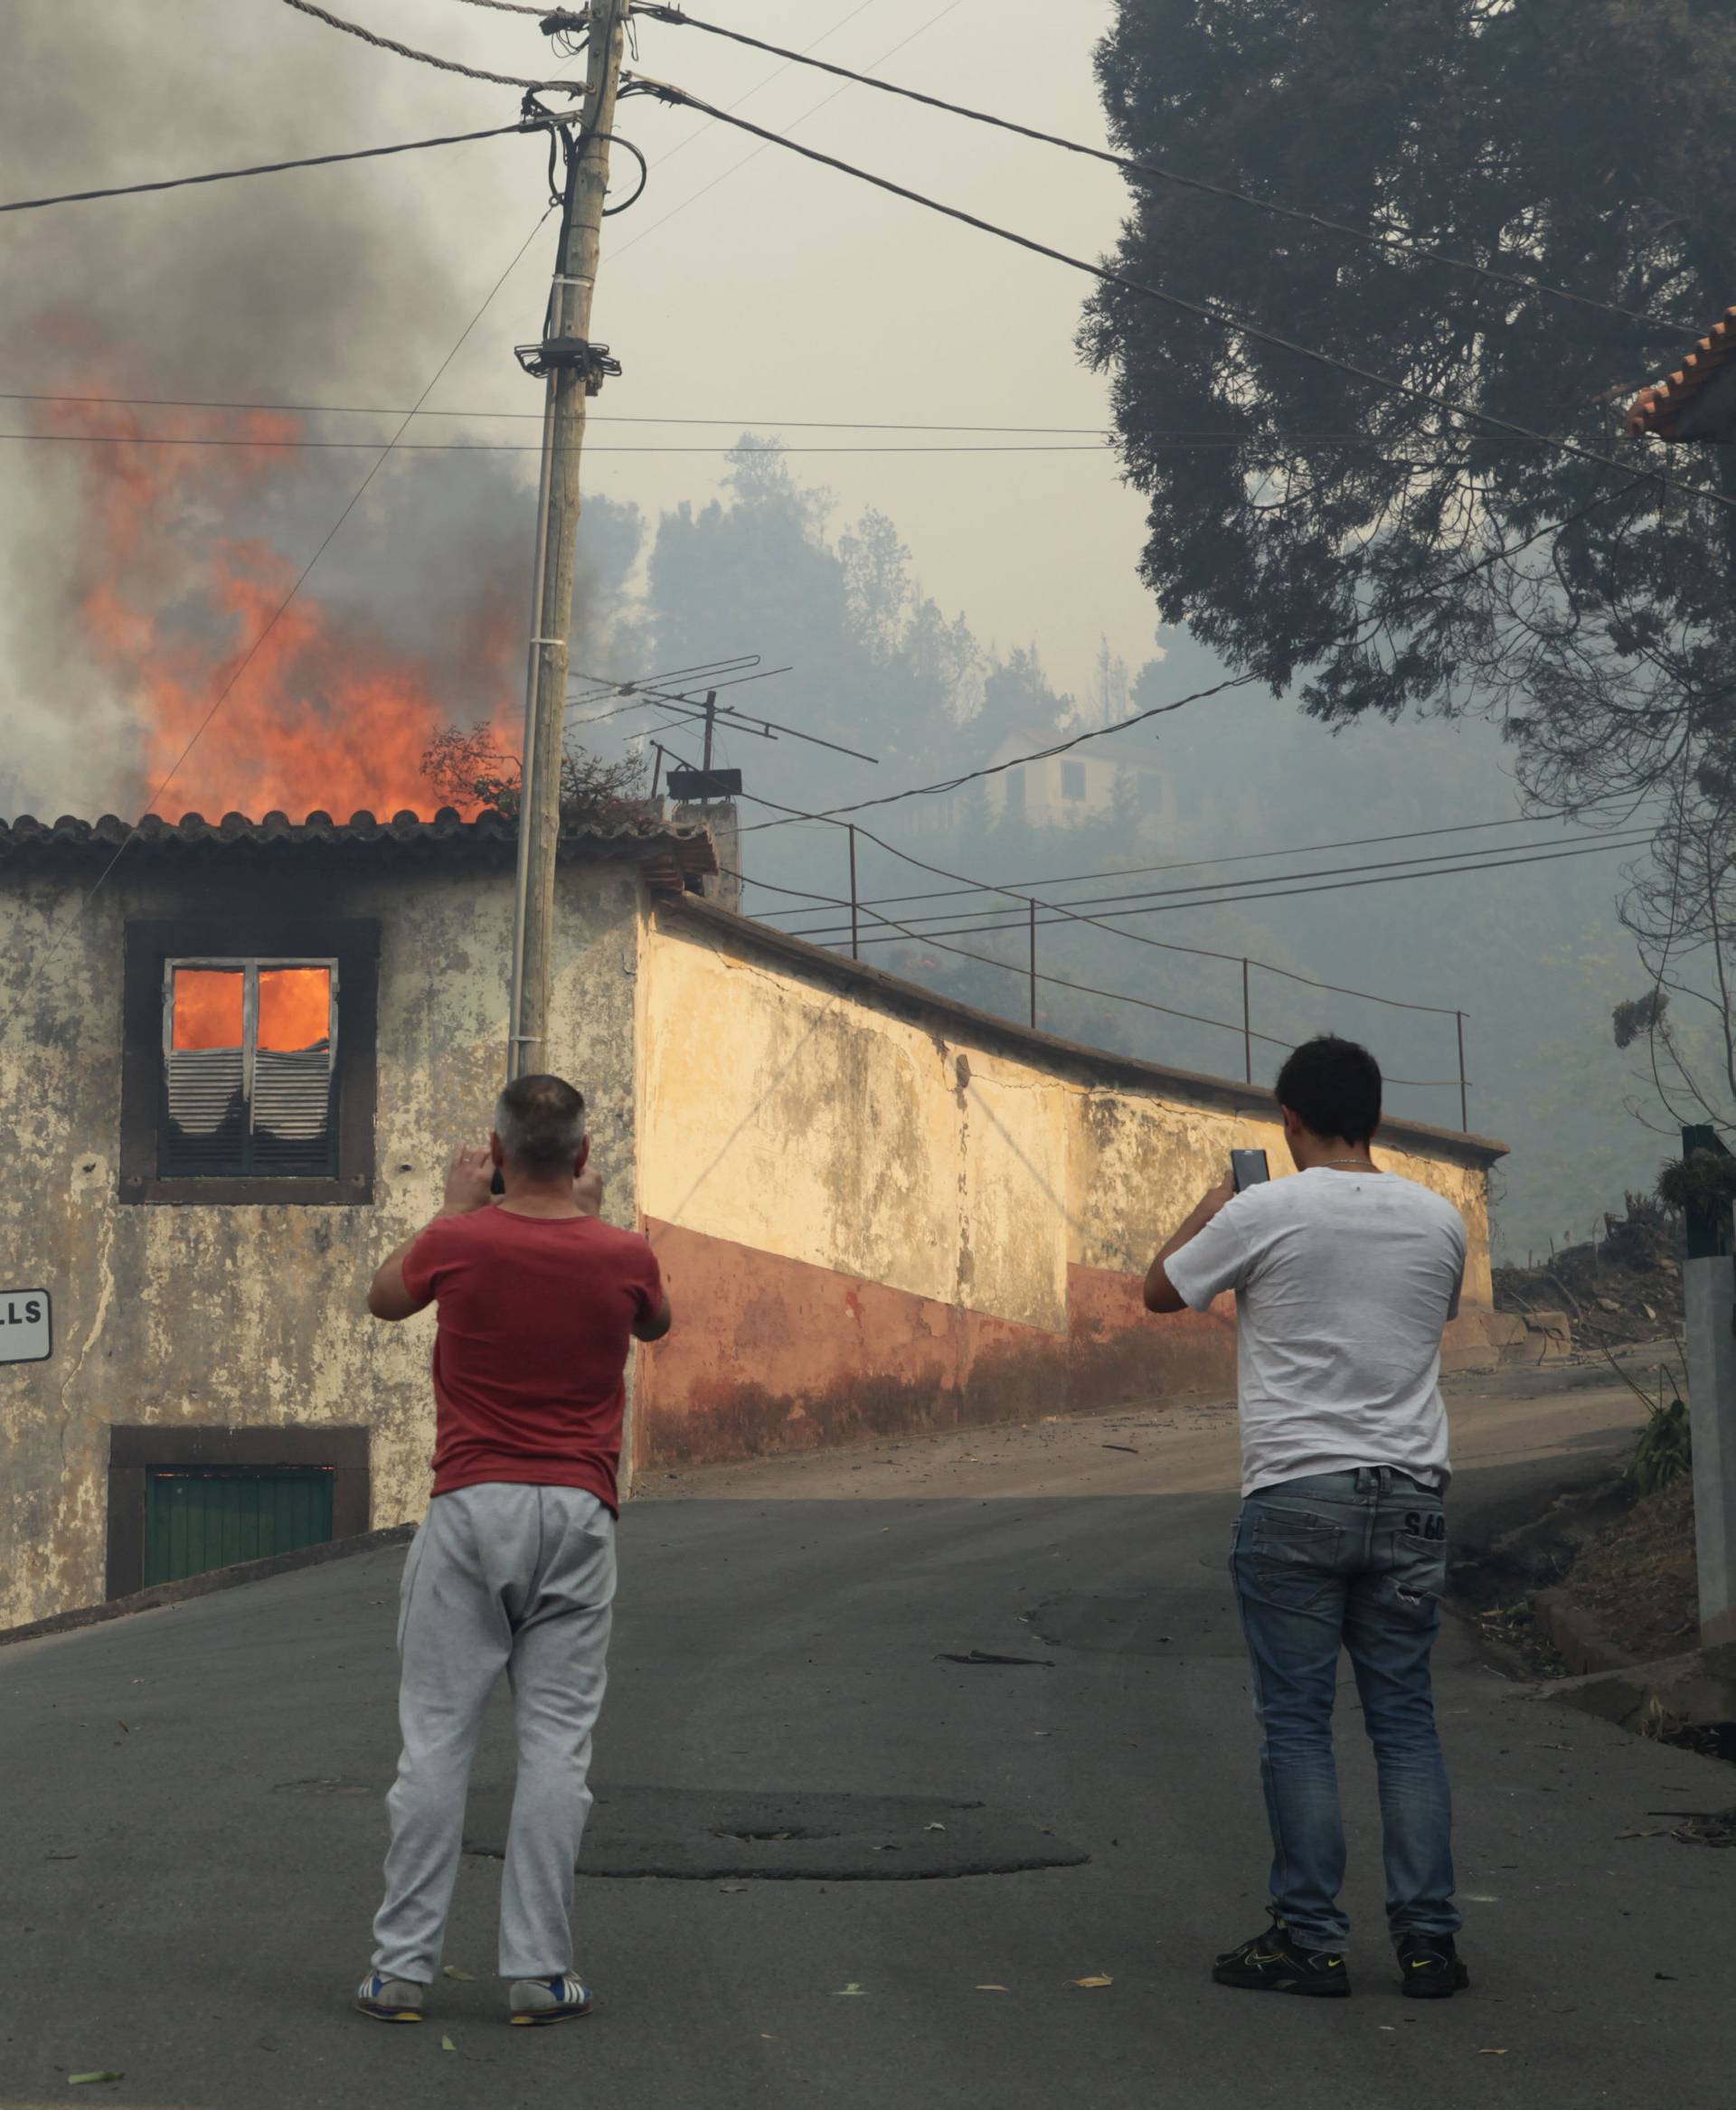 Men take pictures of a burning house at Caminho do Meio during the forest fires in Funchal